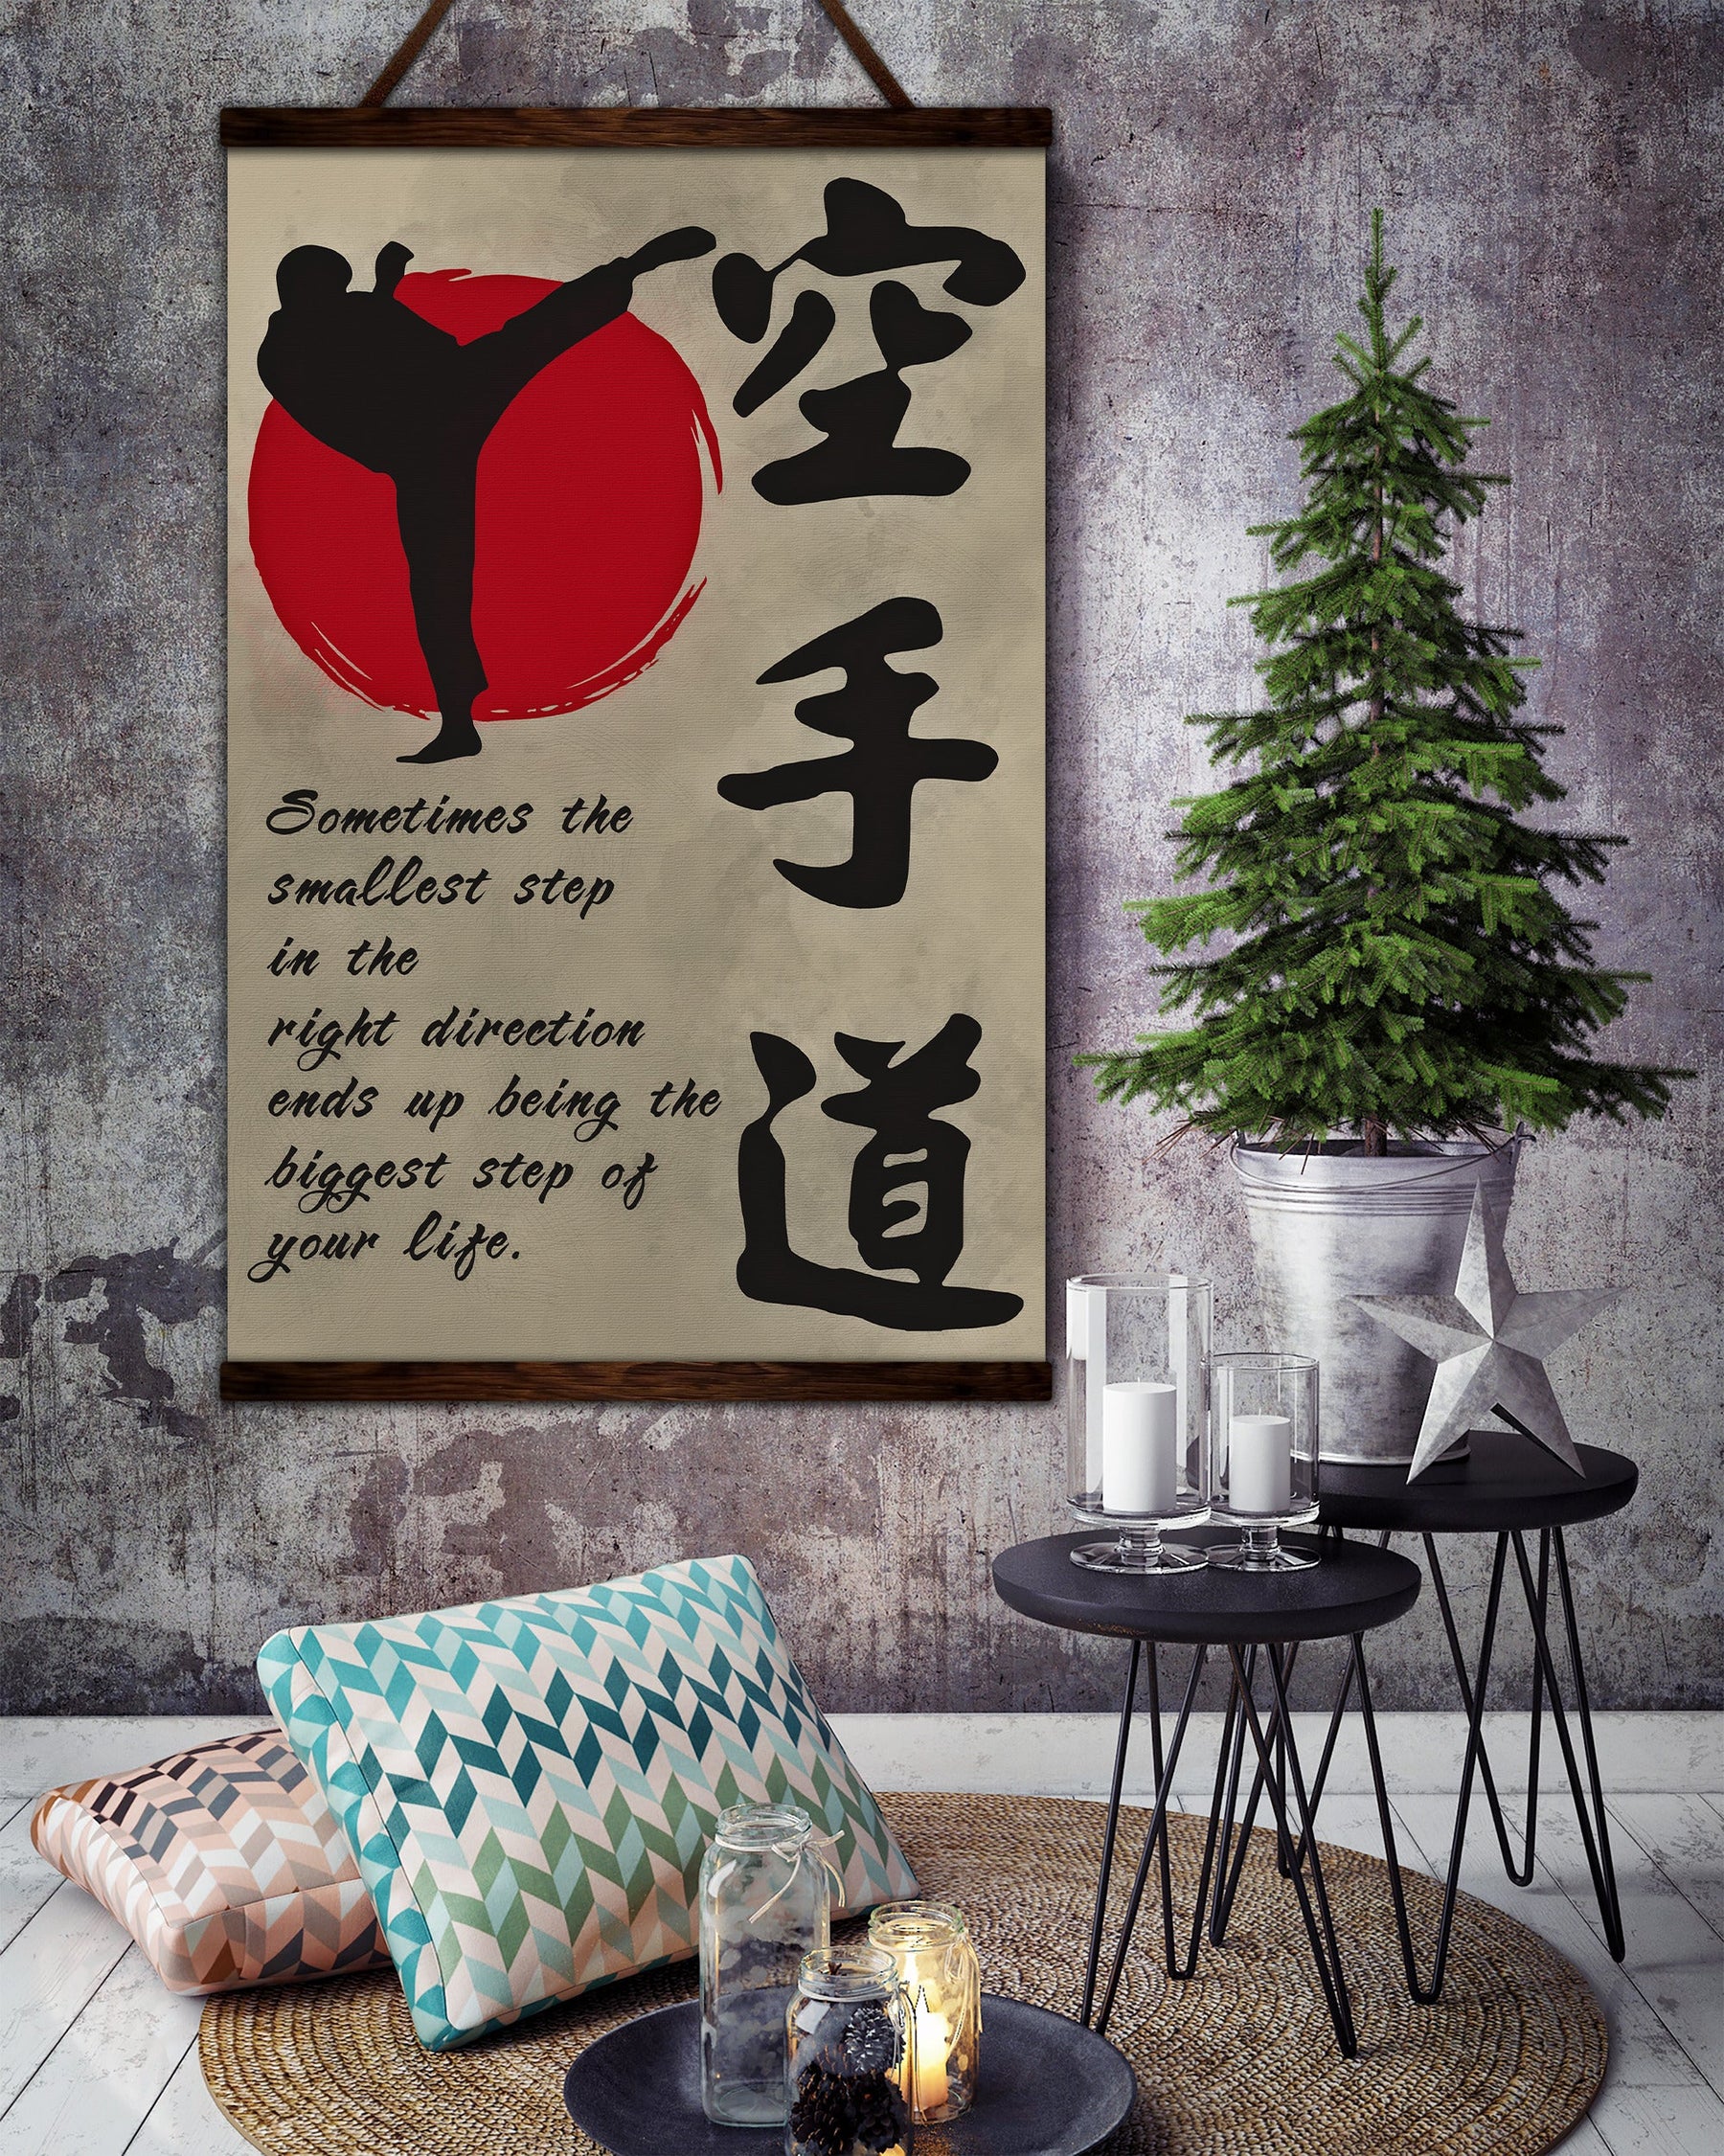 KA031 - Sometimes The Smallest Step In The Right Direction Ends Up Being The Biggest Step Of Your Life - Shotokan Karate - Vertical Poster - Vertical Canvas - Karate Poster - Karate Canvas